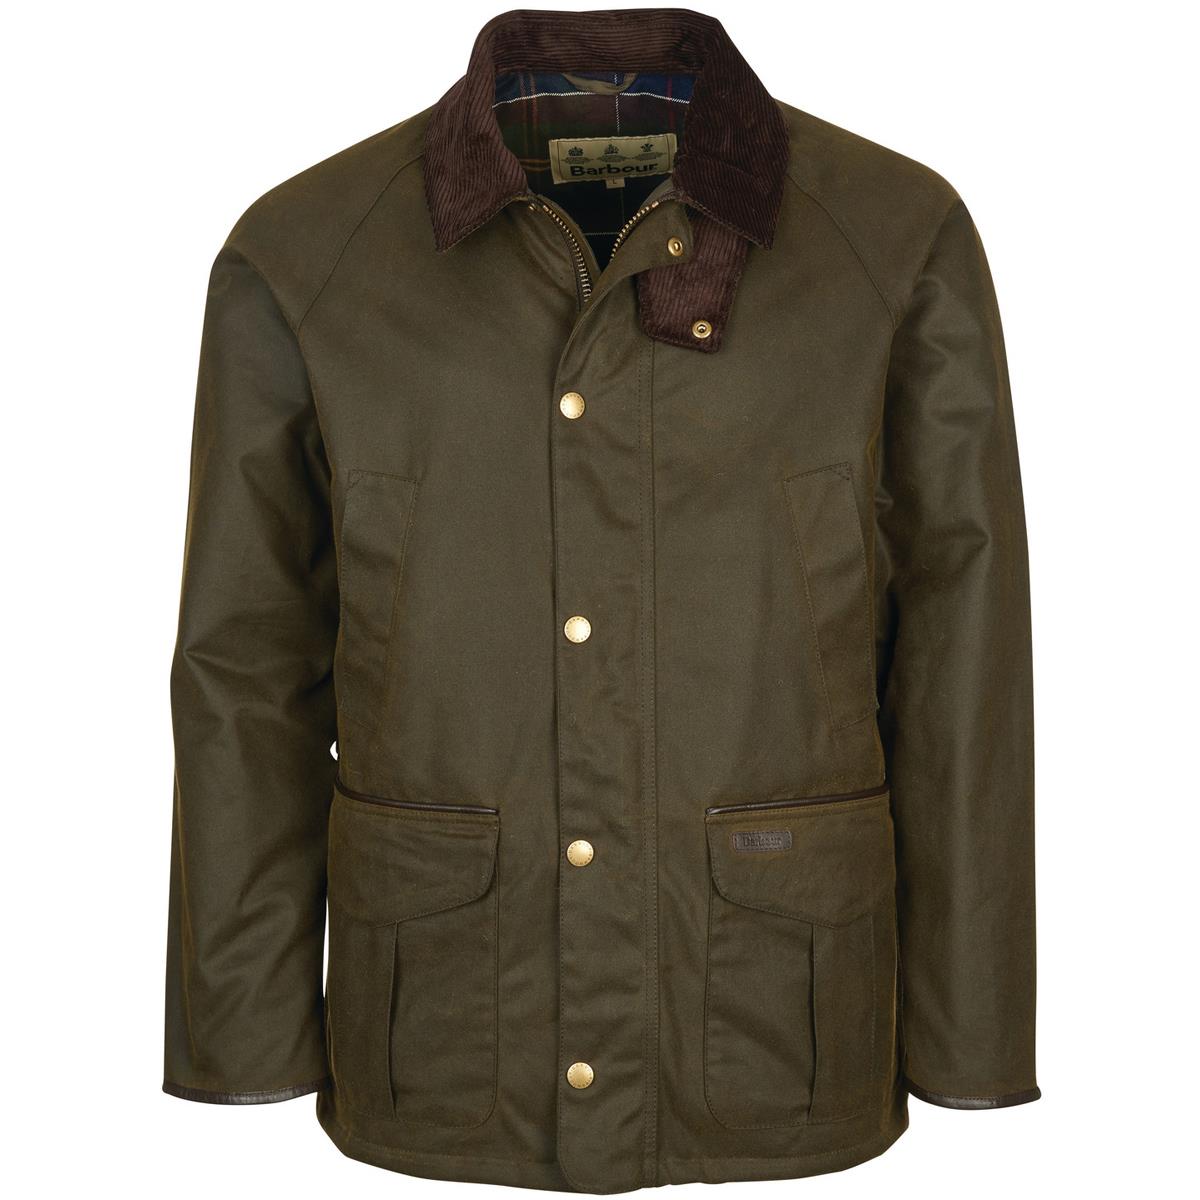 Barbour Mens Stratford Wax Jacket Questions & Answers